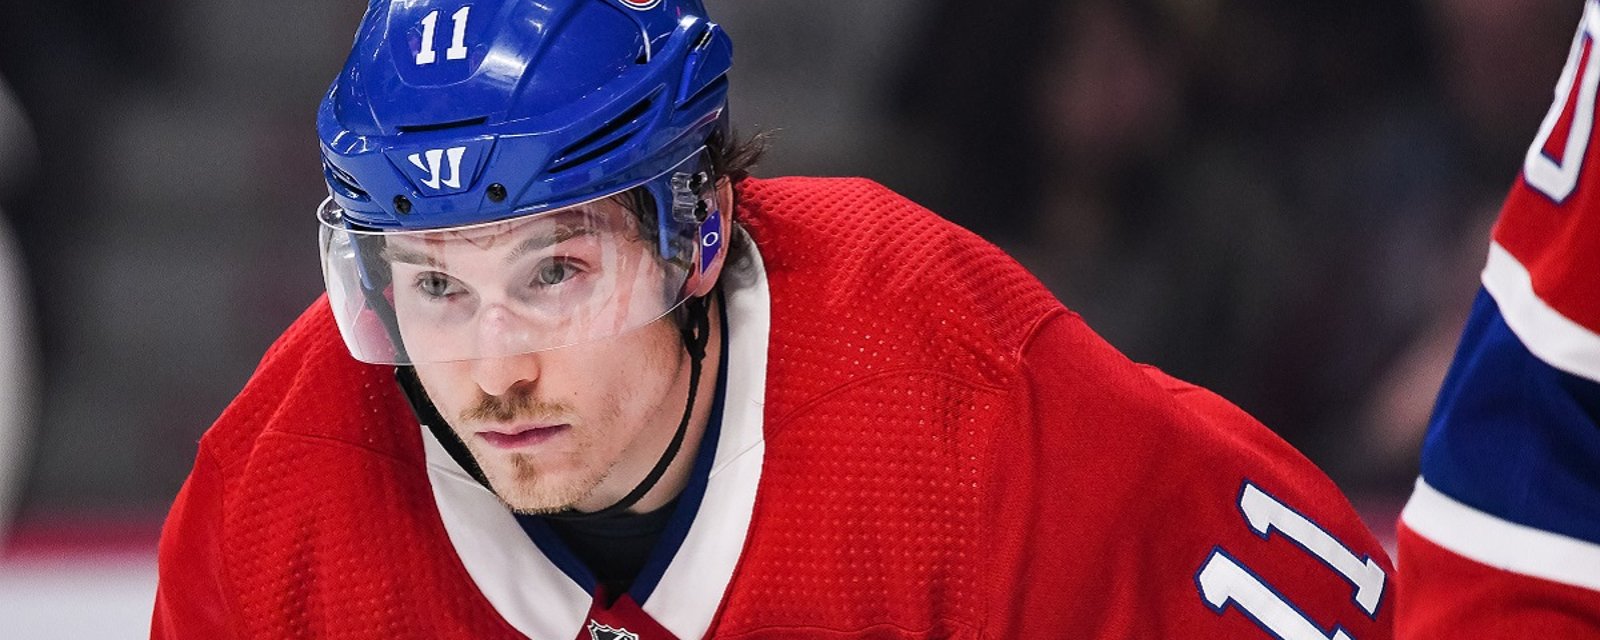 Concerning update on Brendan Gallagher from the Montreal Canadiens.